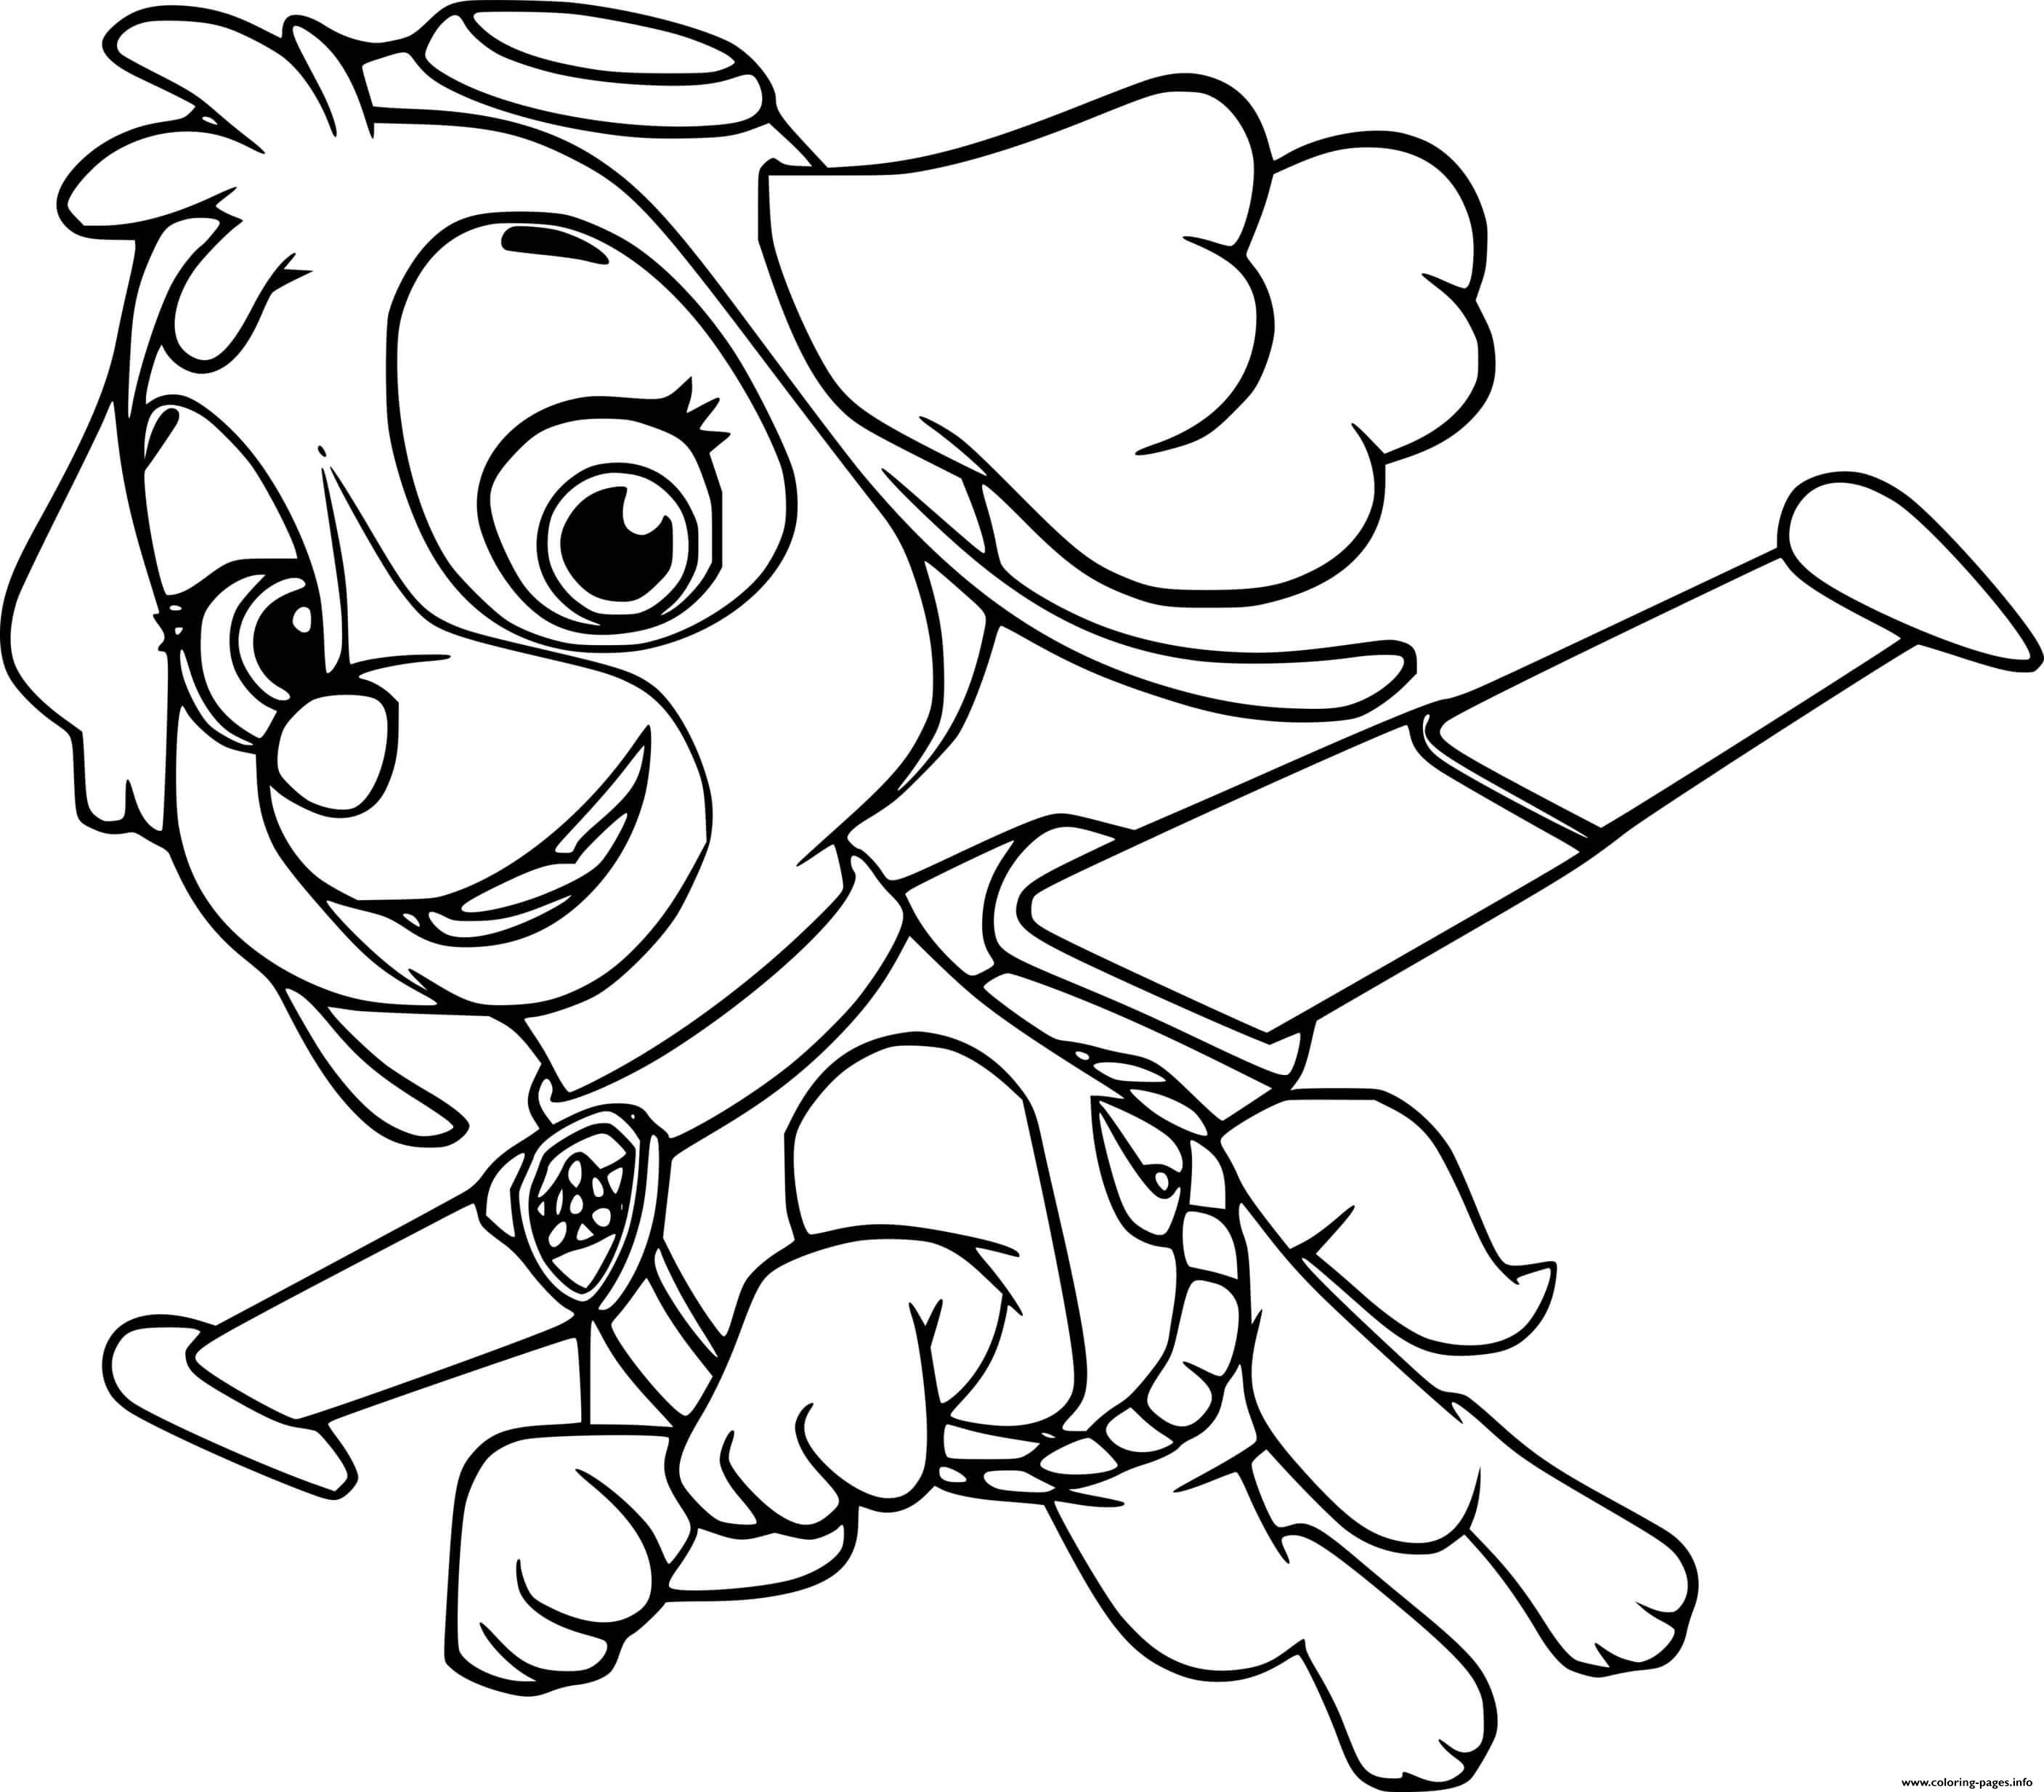 Skye Flying With Her Equipment coloring